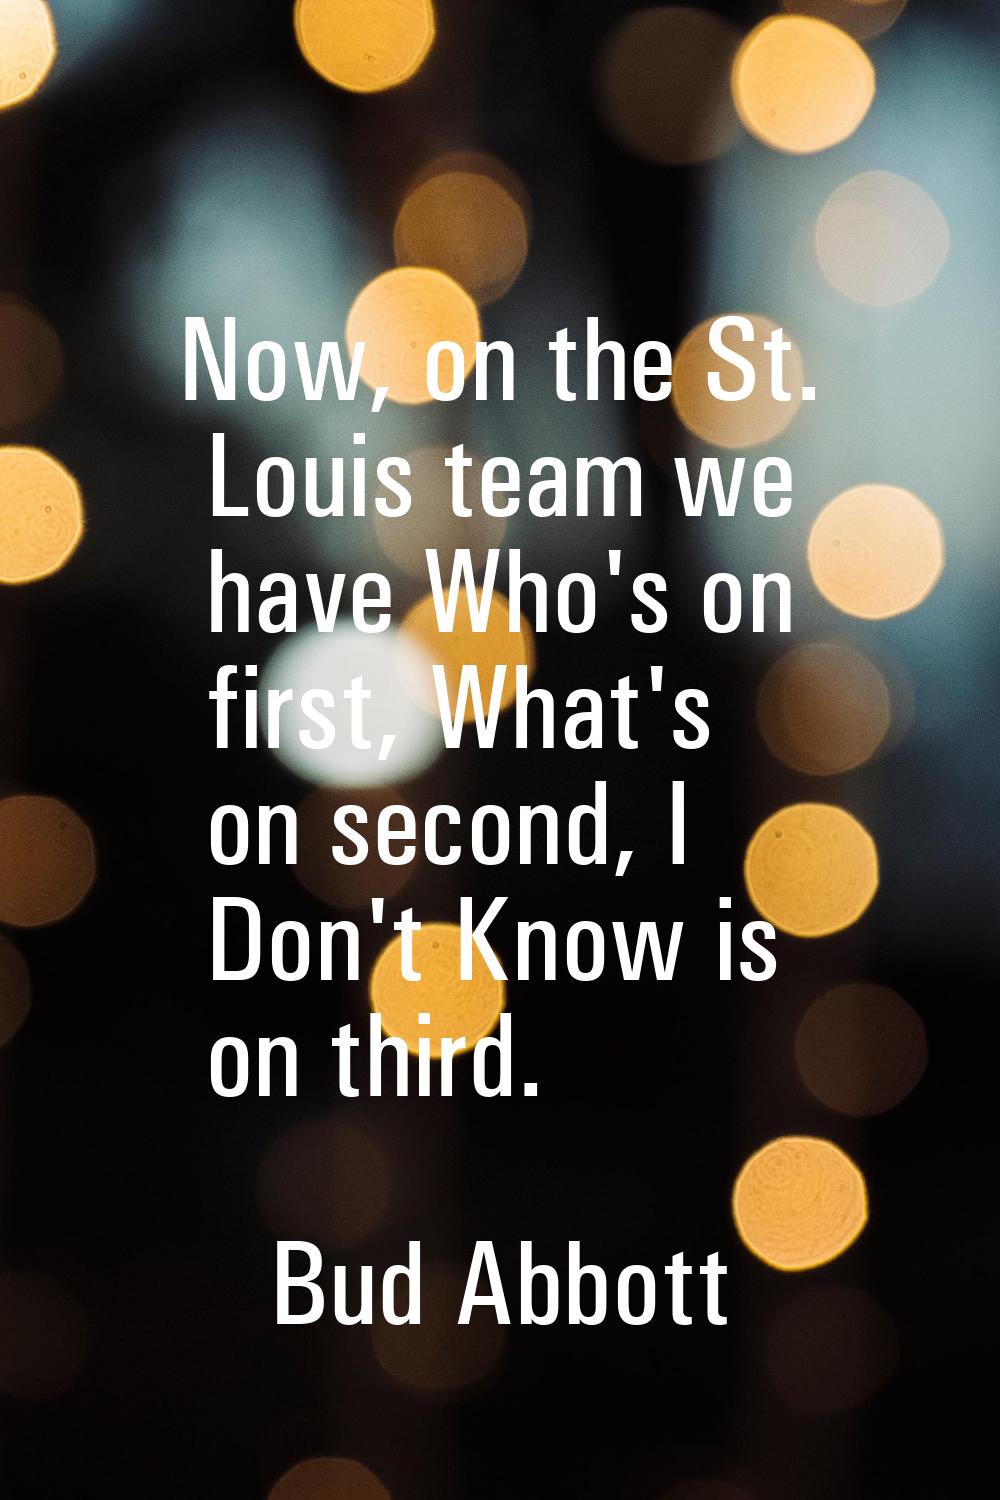 Now, on the St. Louis team we have Who's on first, What's on second, I Don't Know is on third.